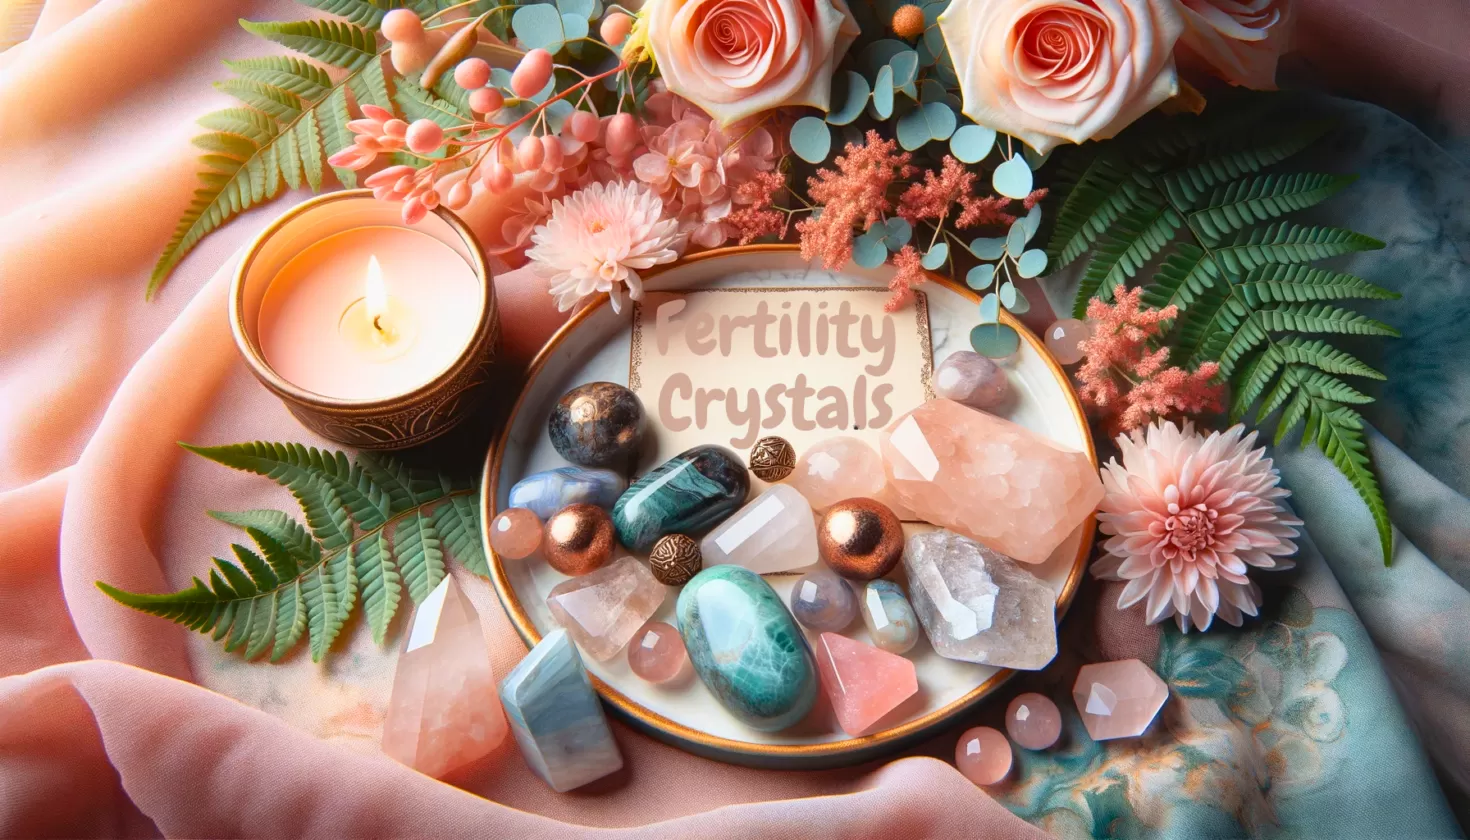 Artistic arrangement of crystals for fertility, symbolizing growth, nurturing, and natural blossoming